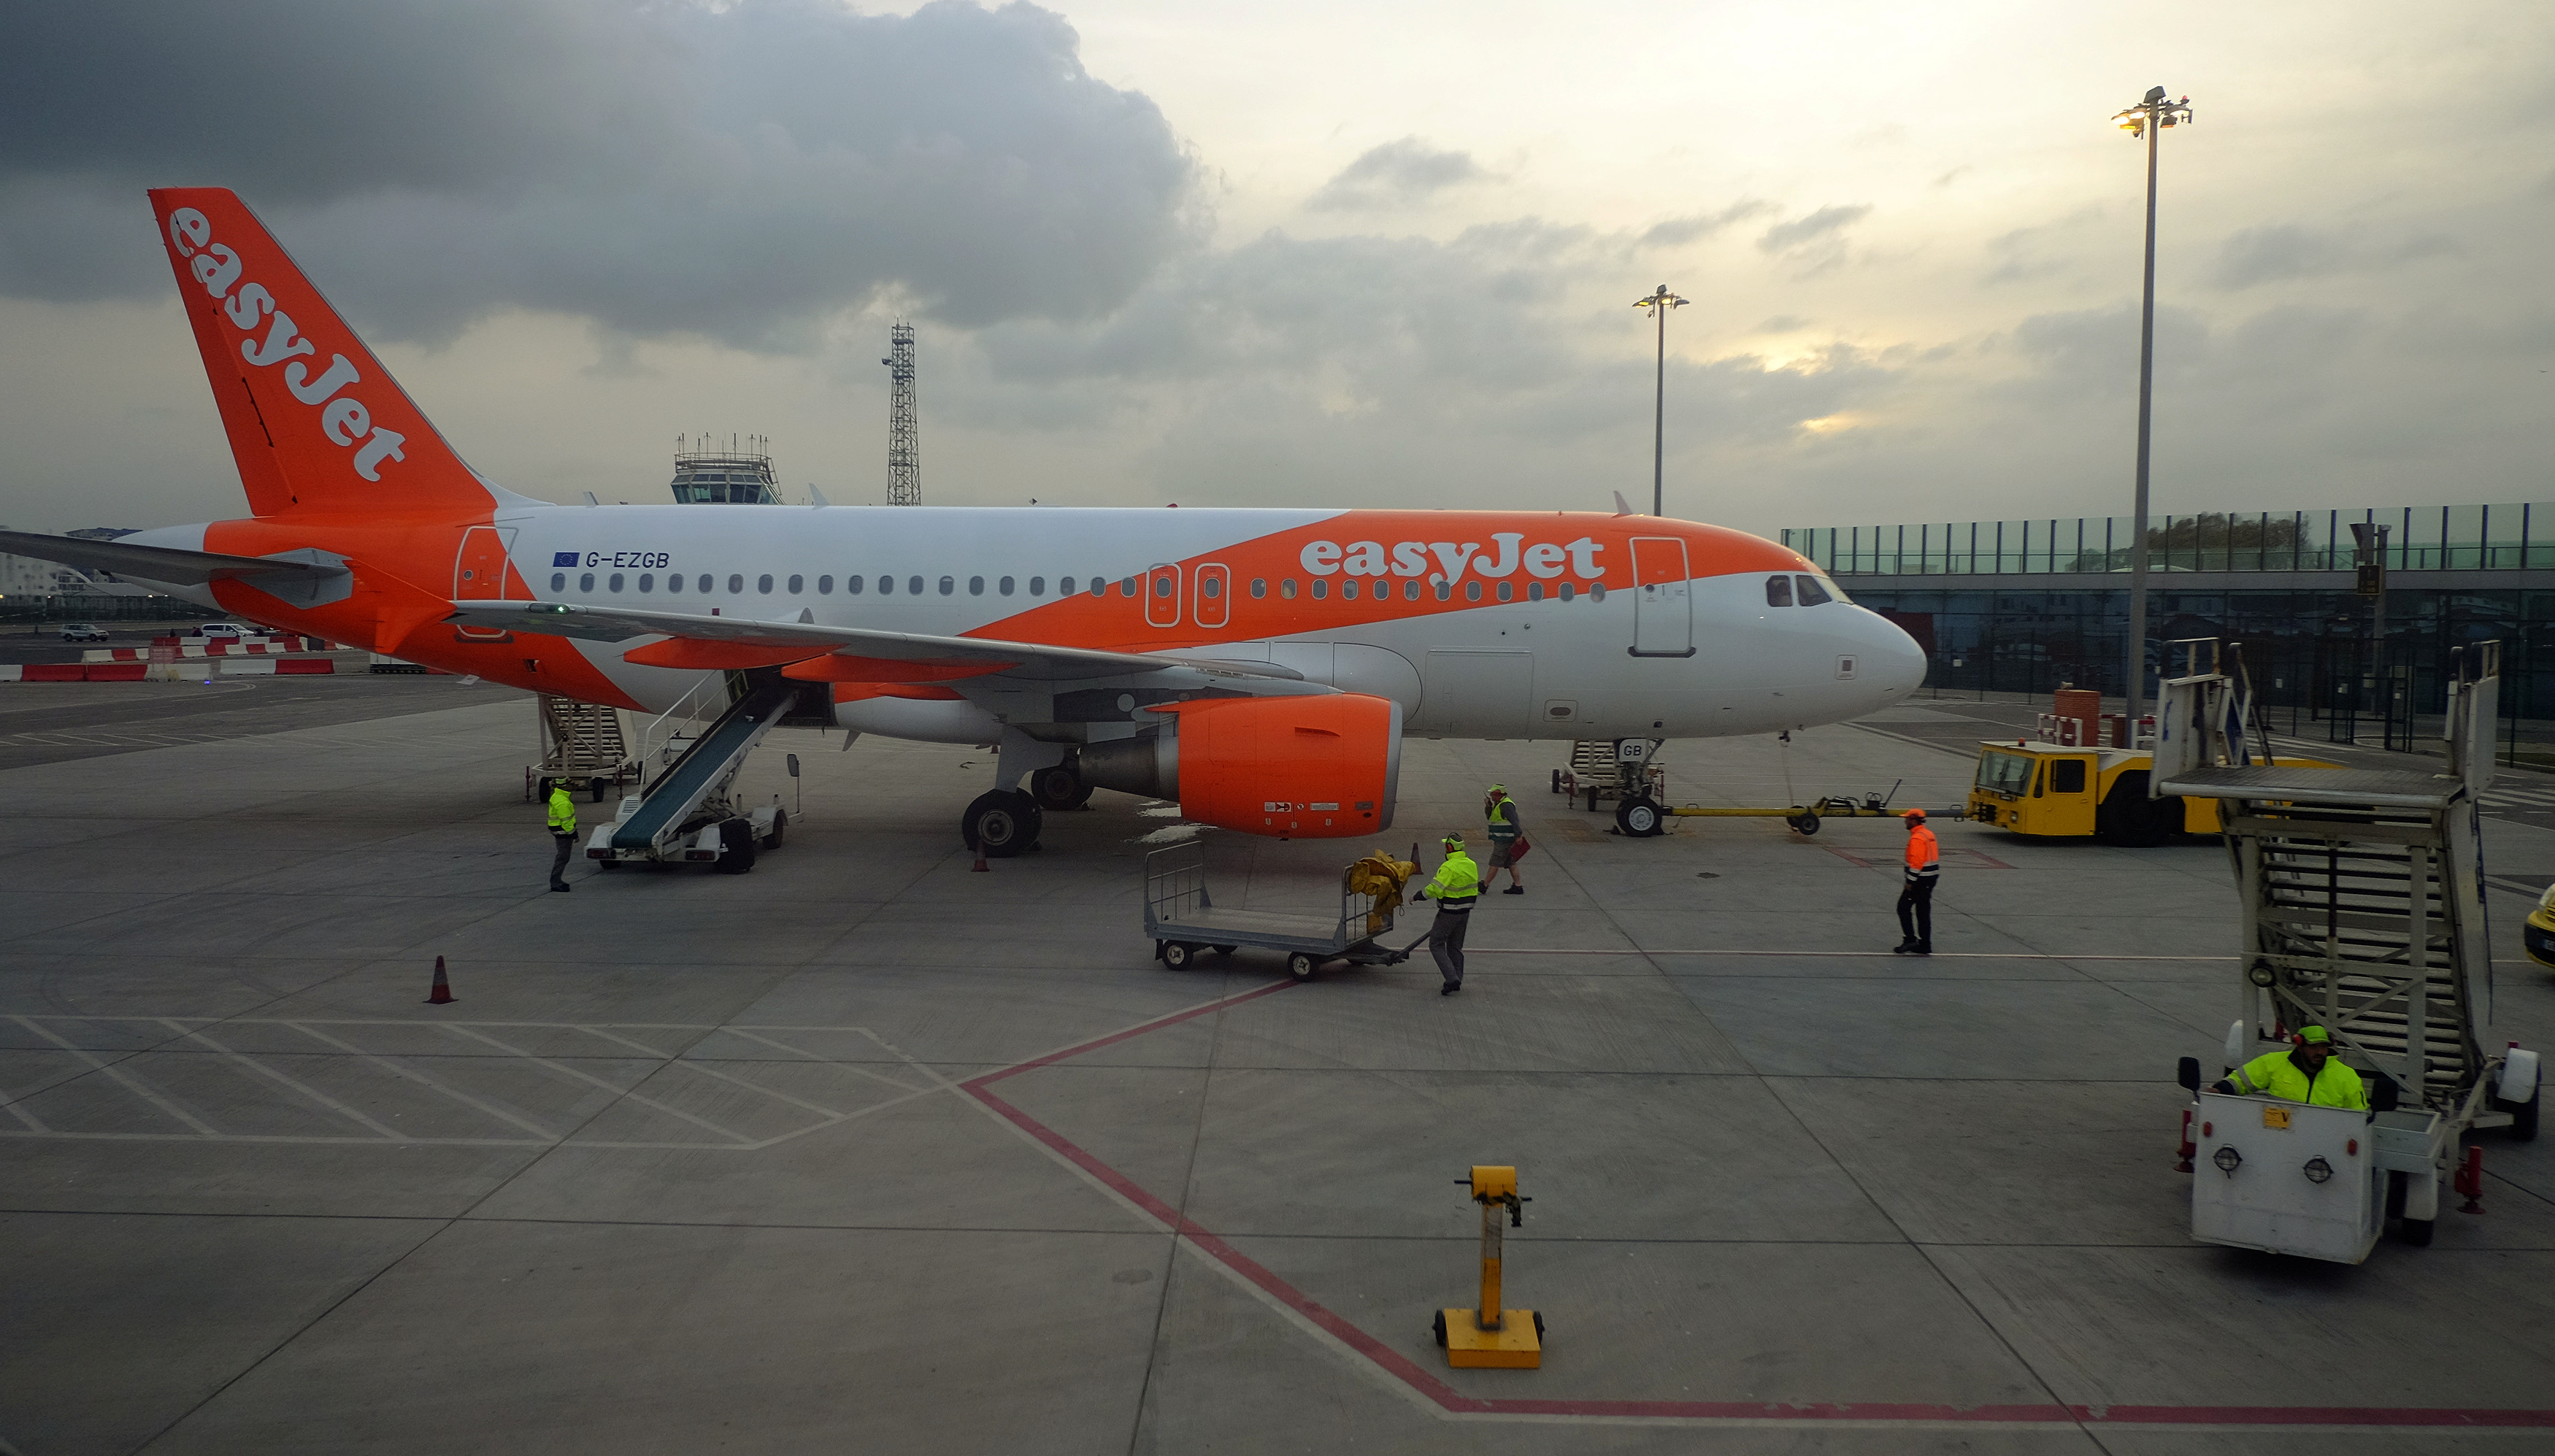 Ground crew tend to an EasyJet flight at Gibraltar airport in the British overseas territory of Gibraltar